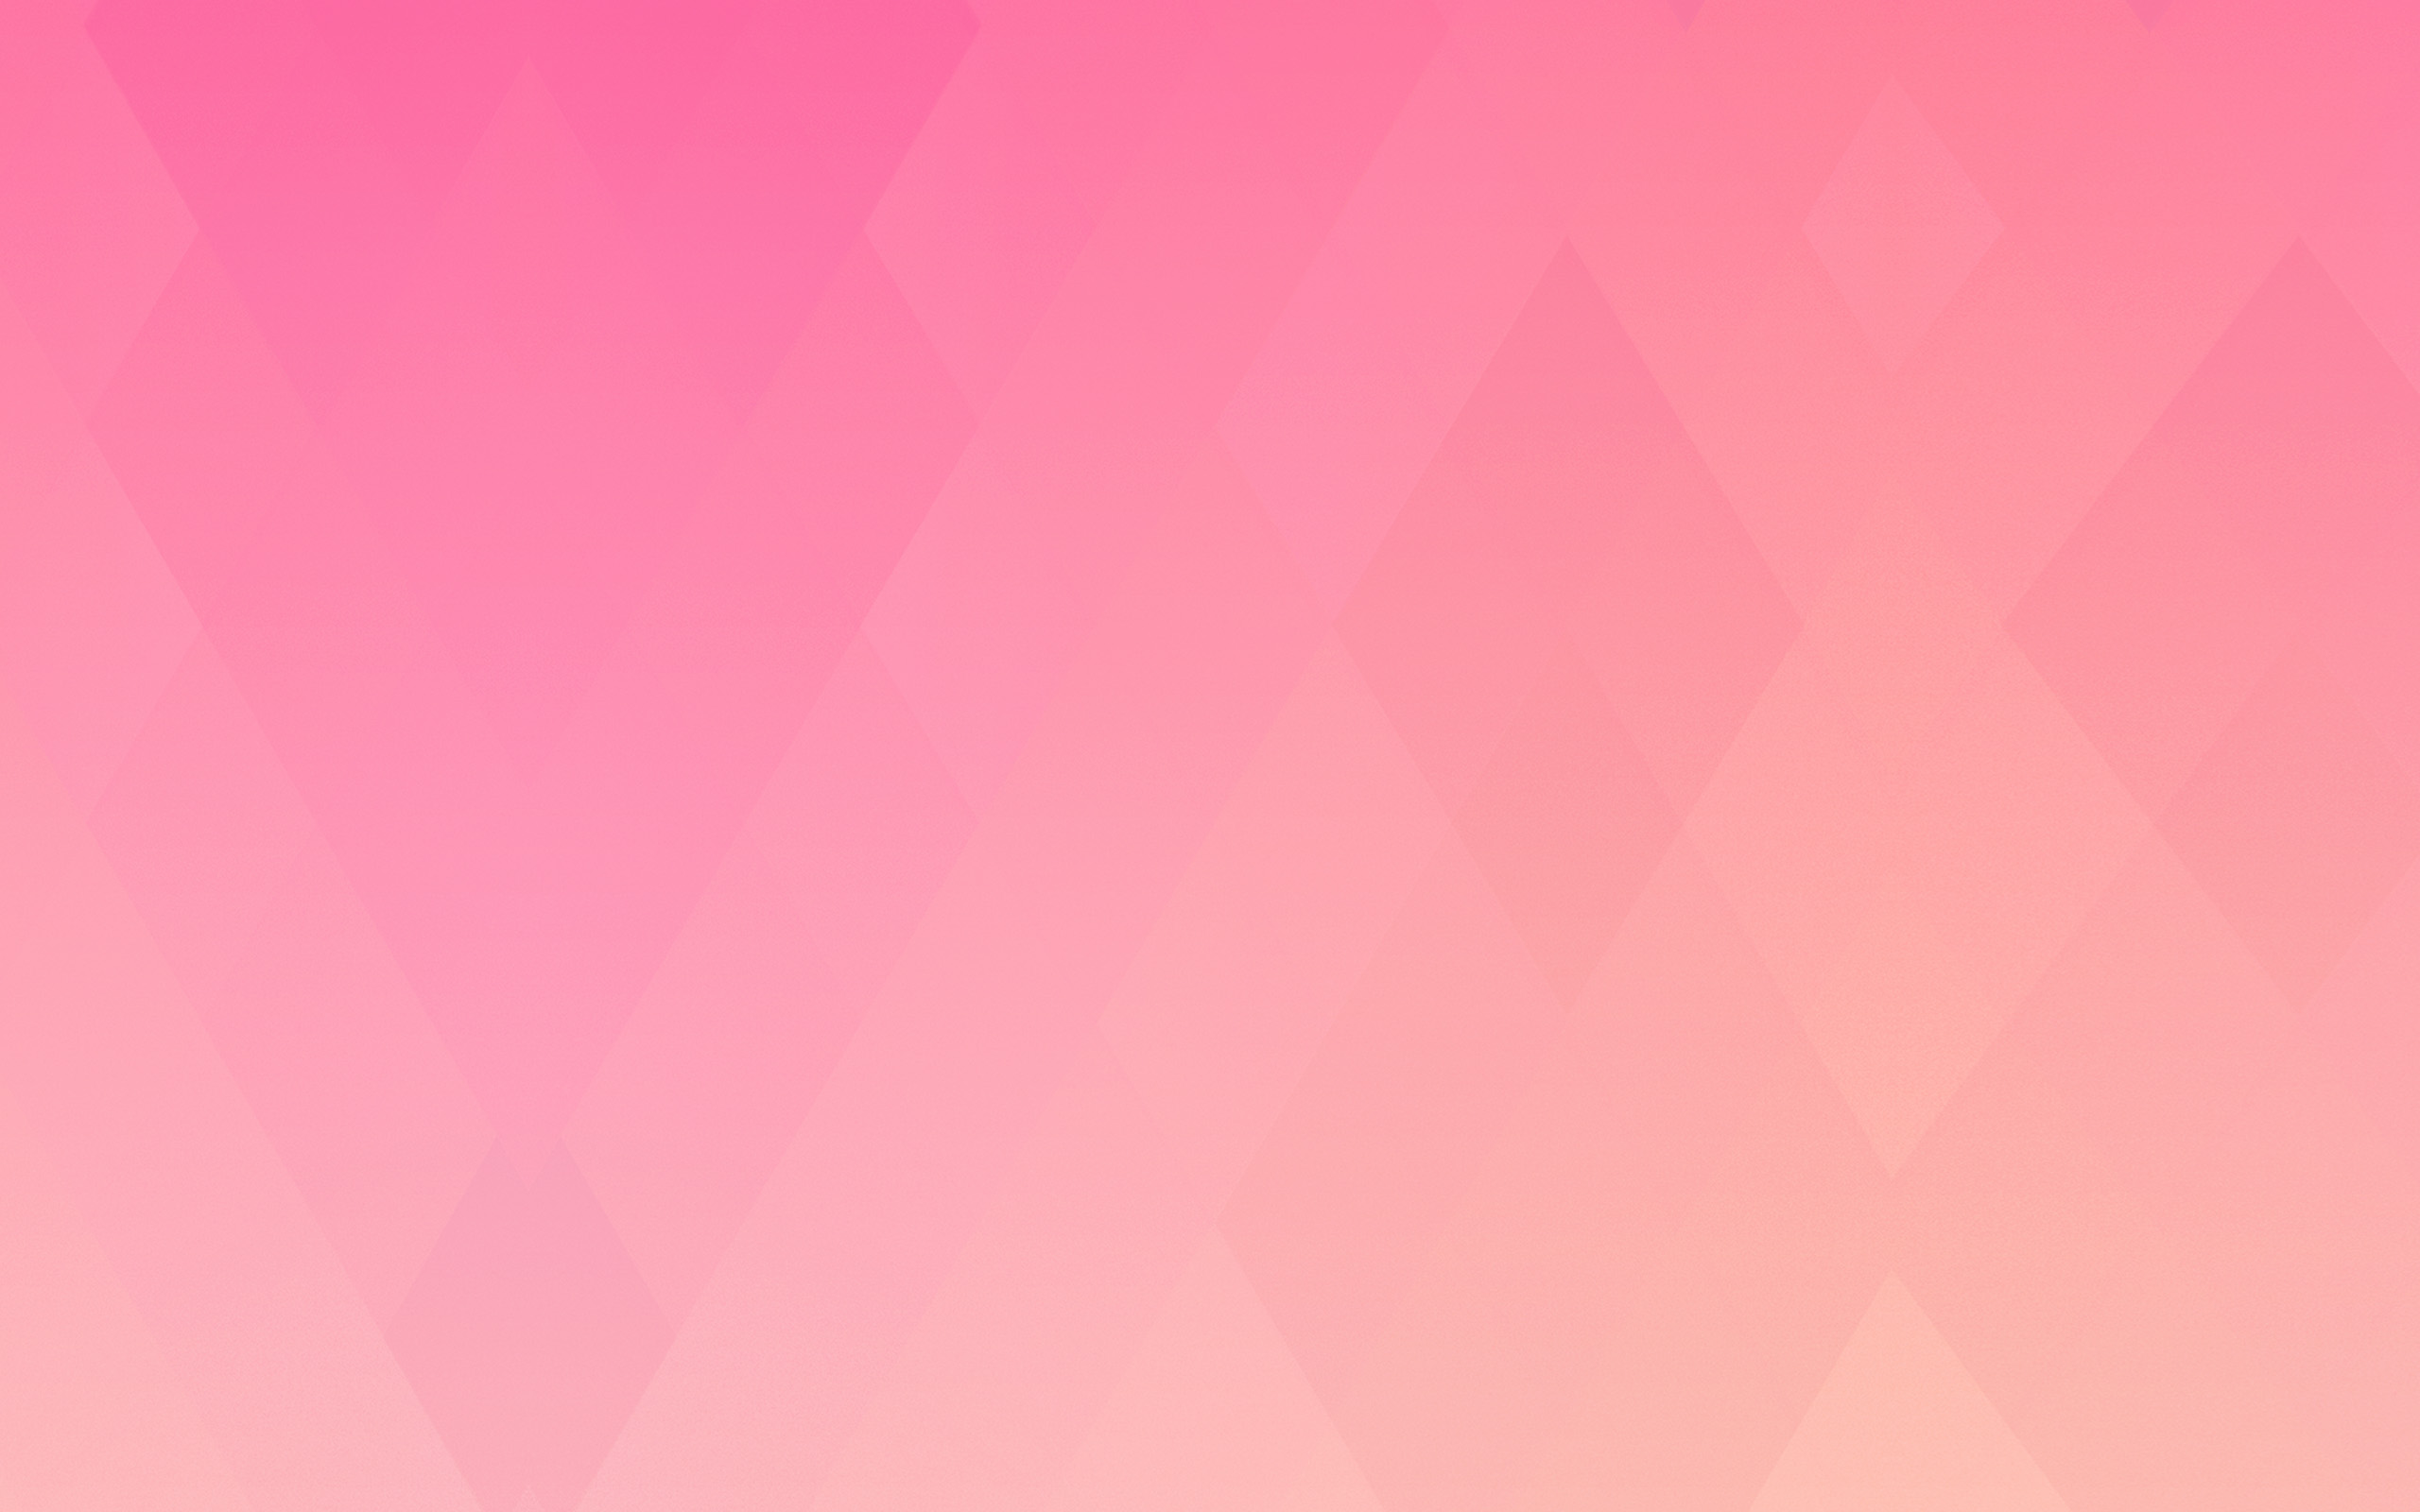 Free download 2560 X Abstract Wallpaper Pink Free Wallpaper Backgrounds [2560x1600] for your